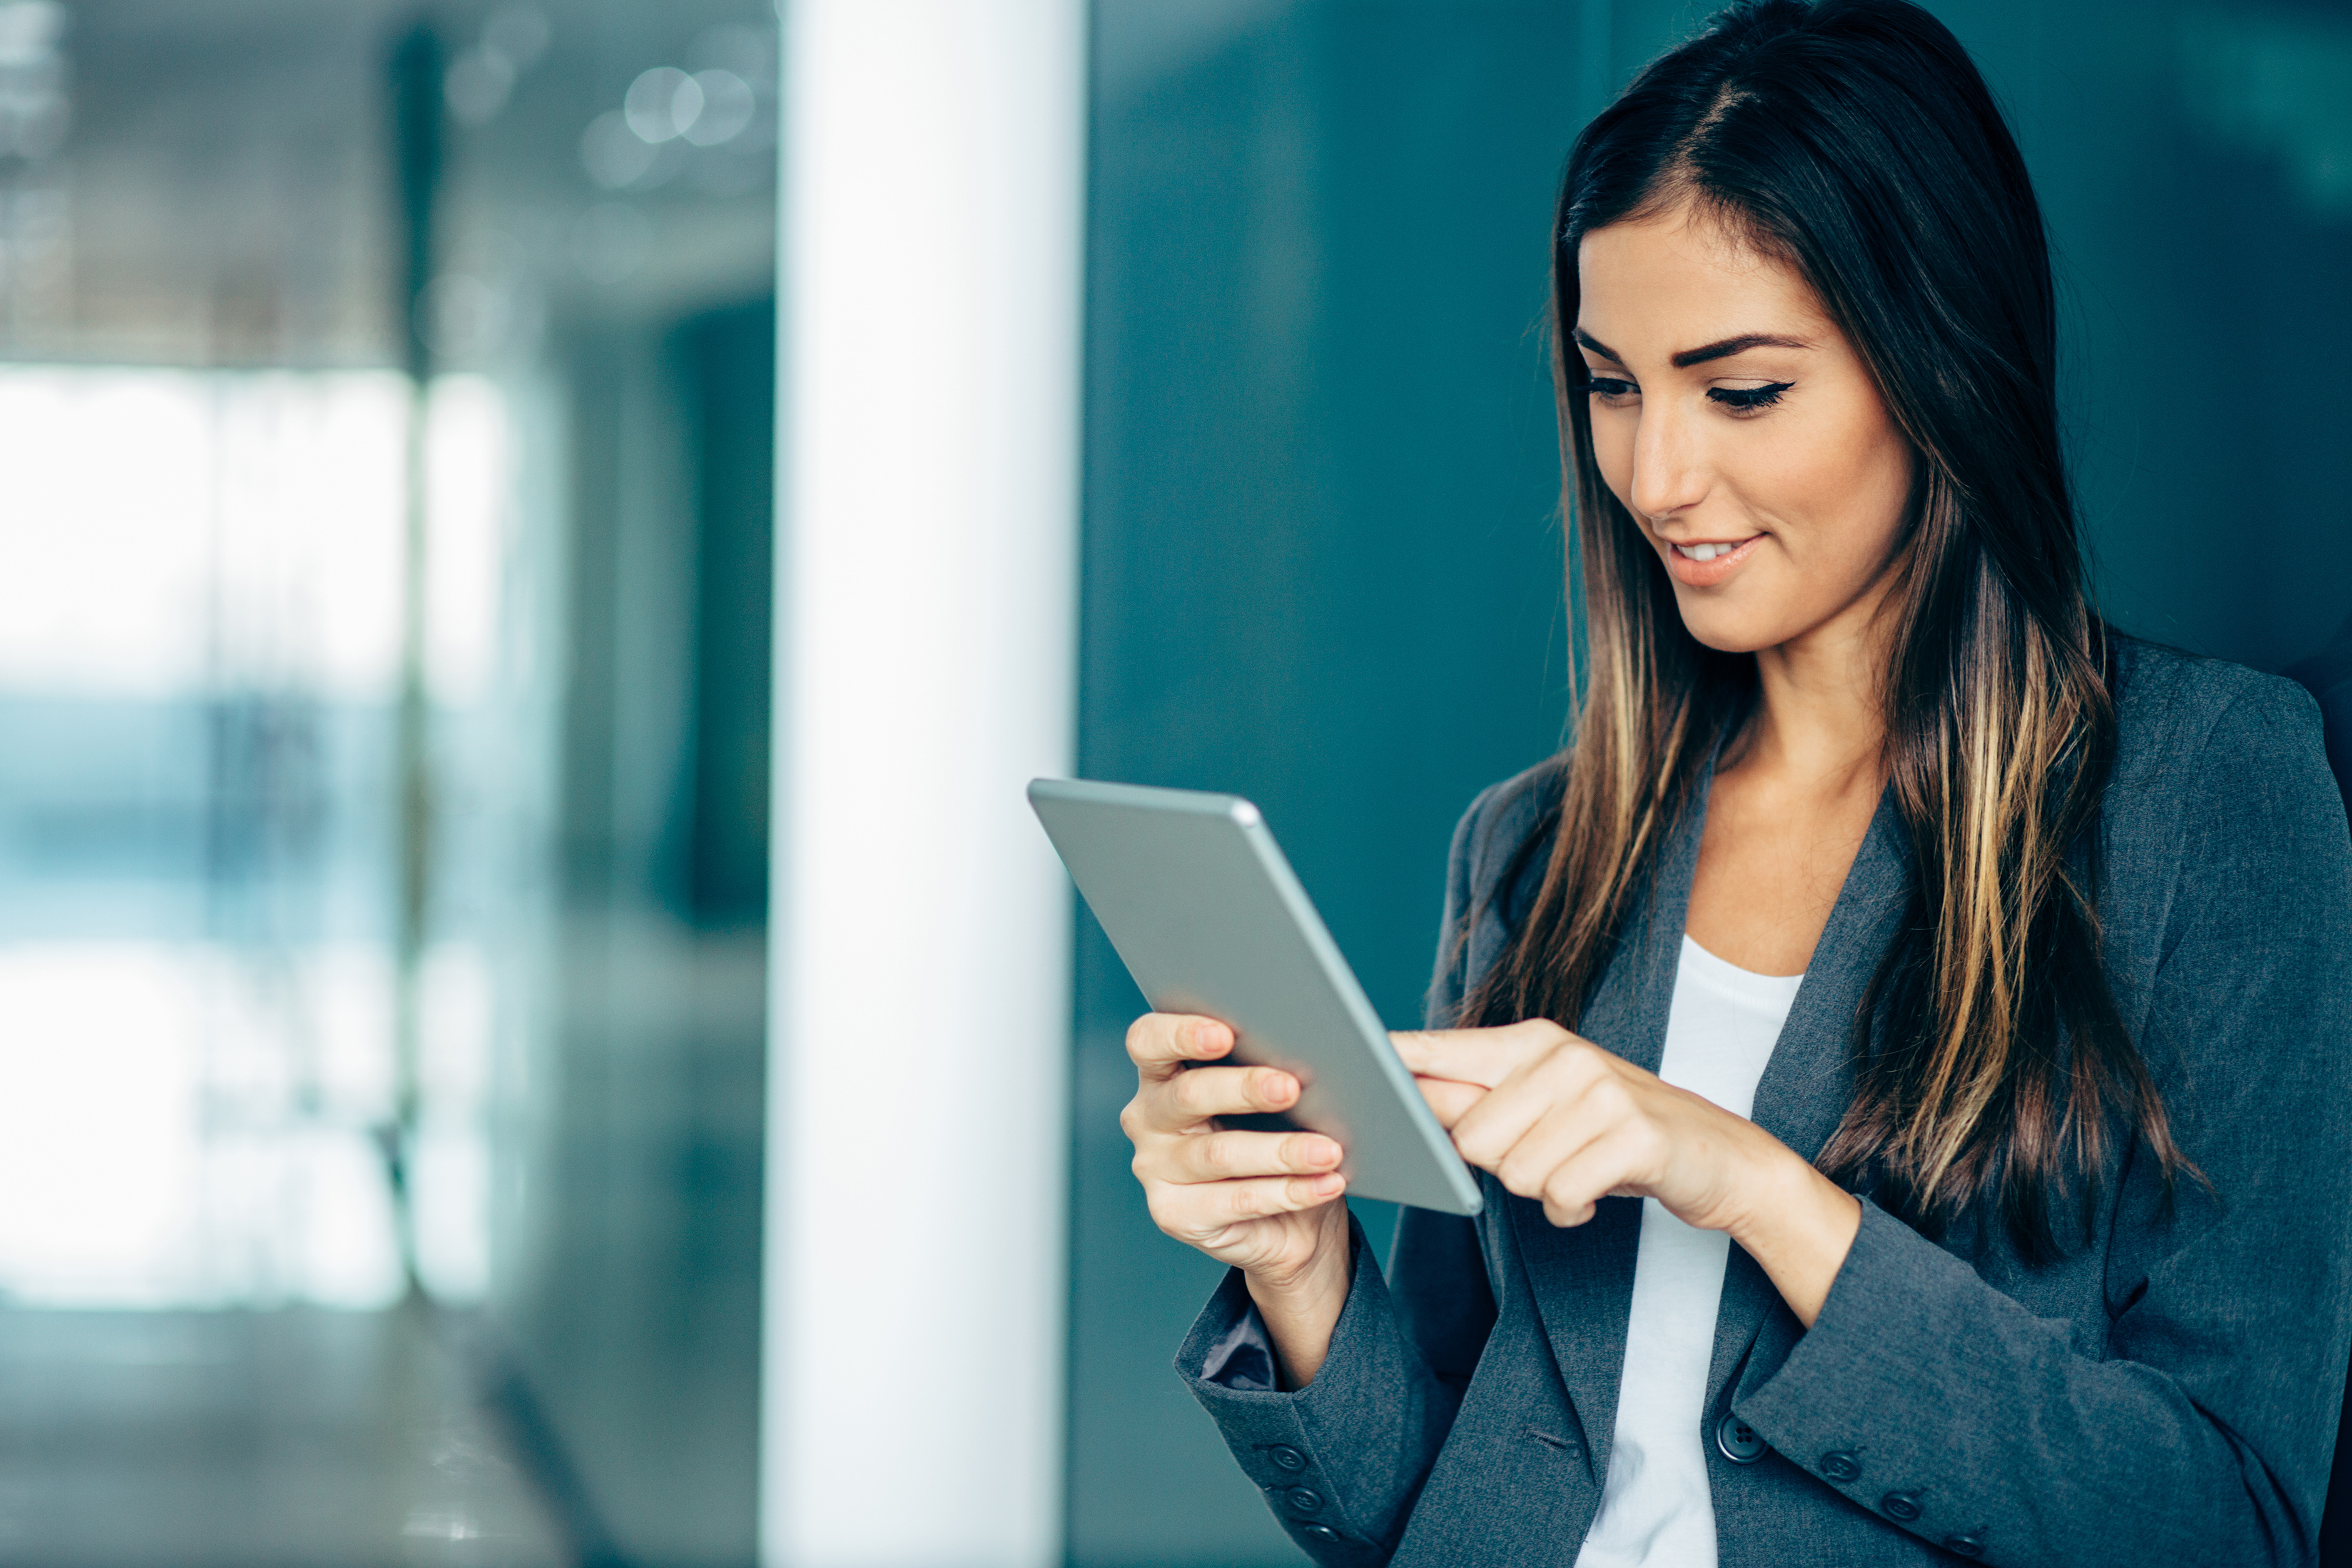 A female banker holding and interacting with a tablet device in her hands